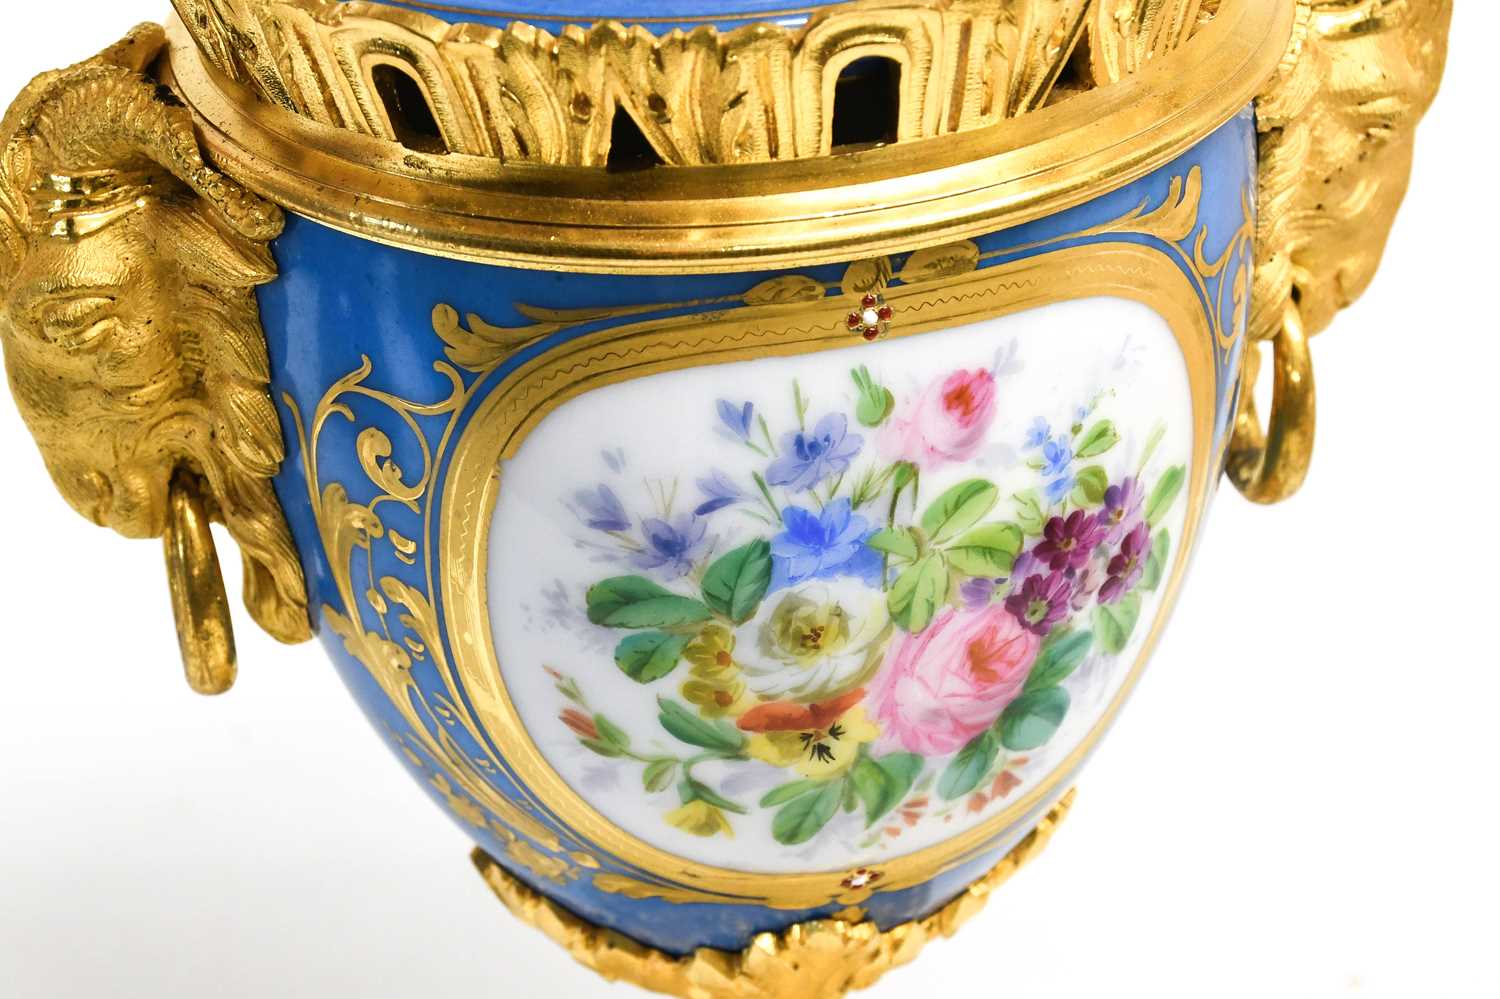 A Pair of Gilt-Metal-Mounted Sèvres-Style Porcelain Vases and Covers, 19th century, of urn shape - Image 2 of 3